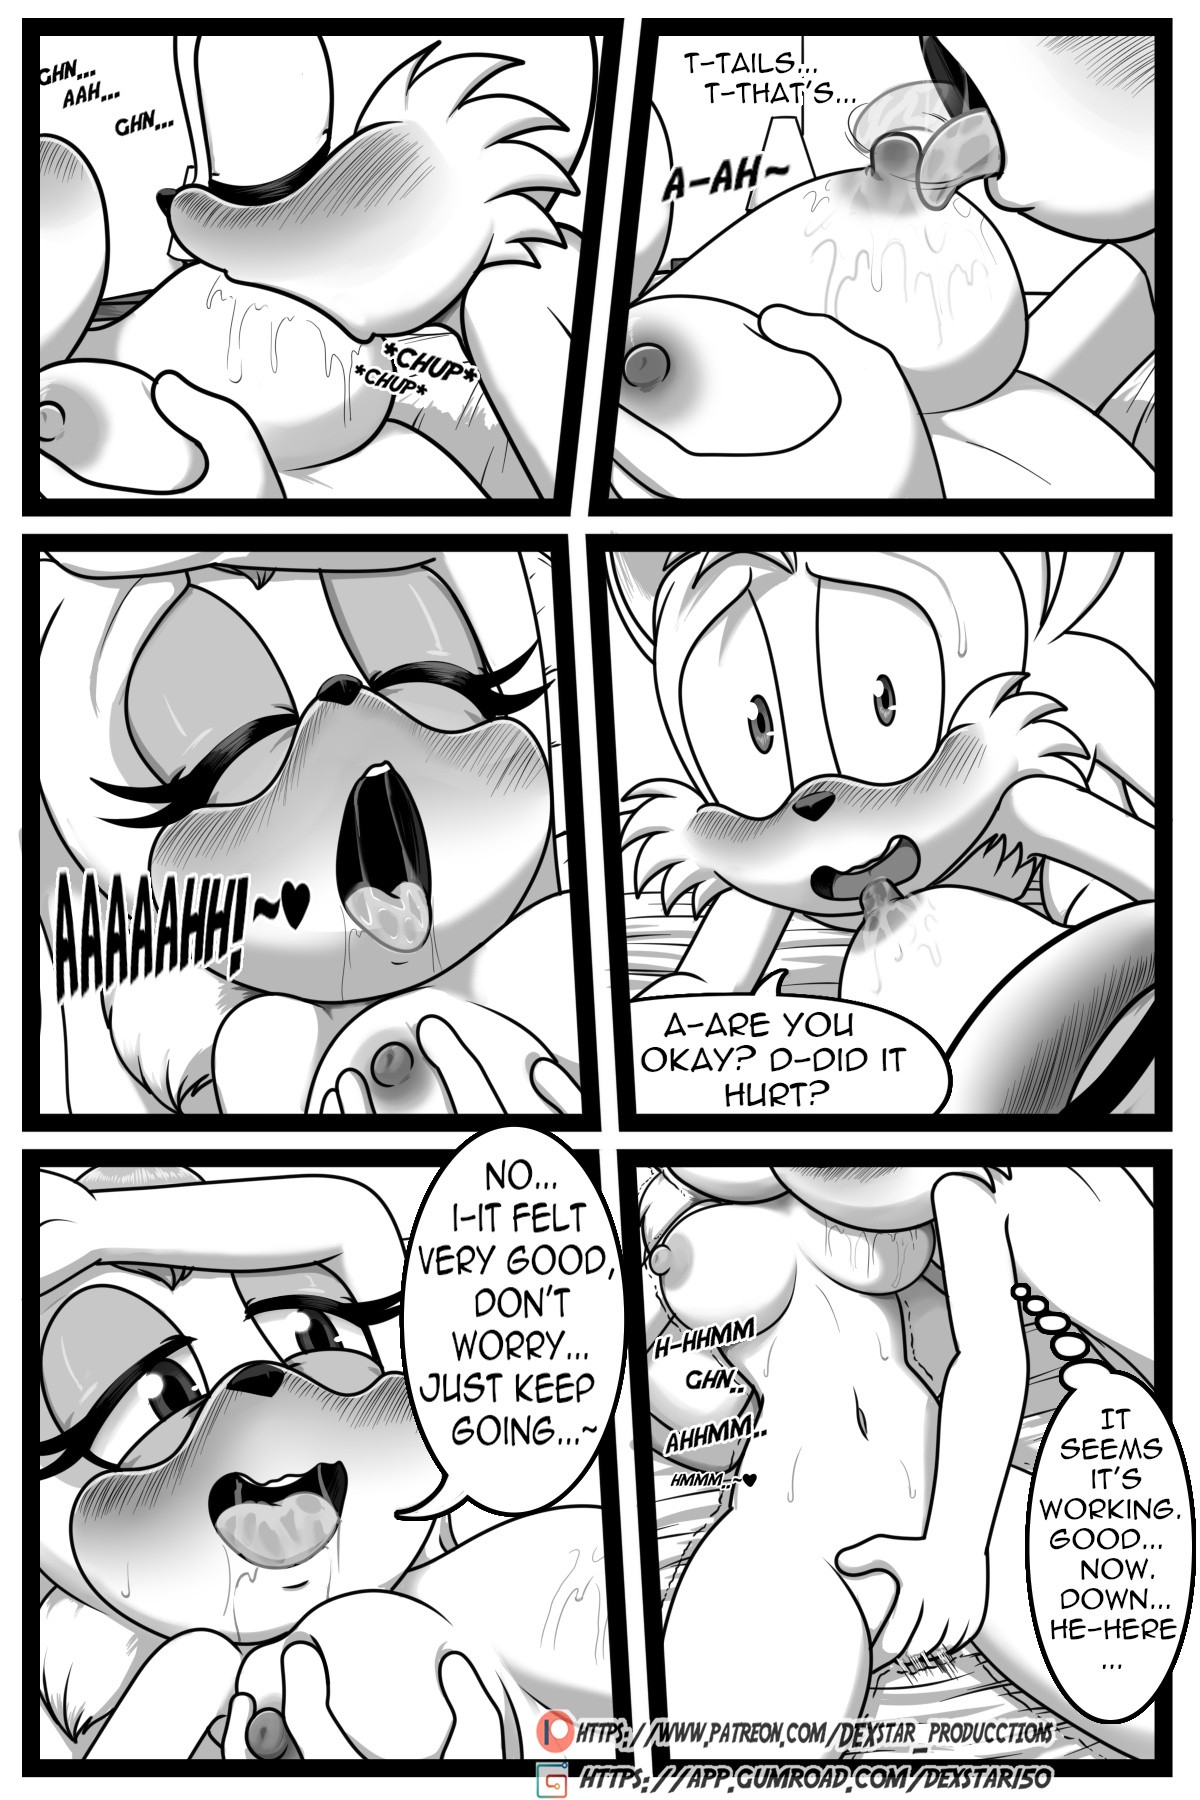 Please Fuck Me: Cream x Tail - Extra Story! porn comic picture 11